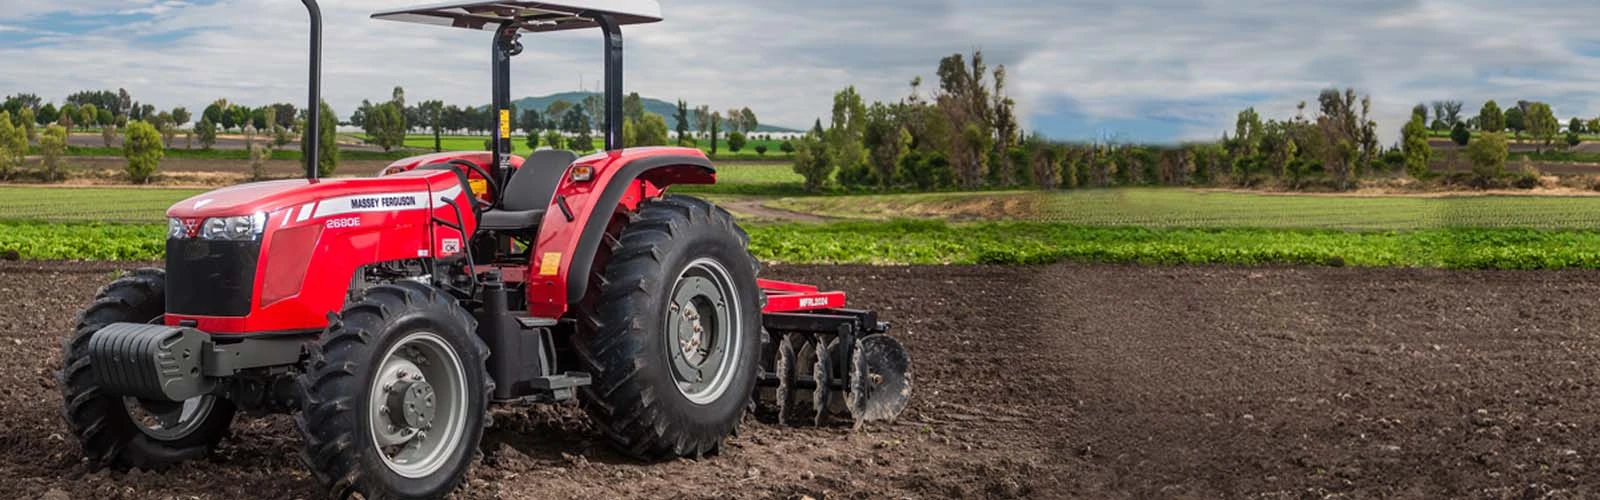 Boosting Crop Yields in Mozambique - Key Benefits of Using Massey Ferguson Tractors